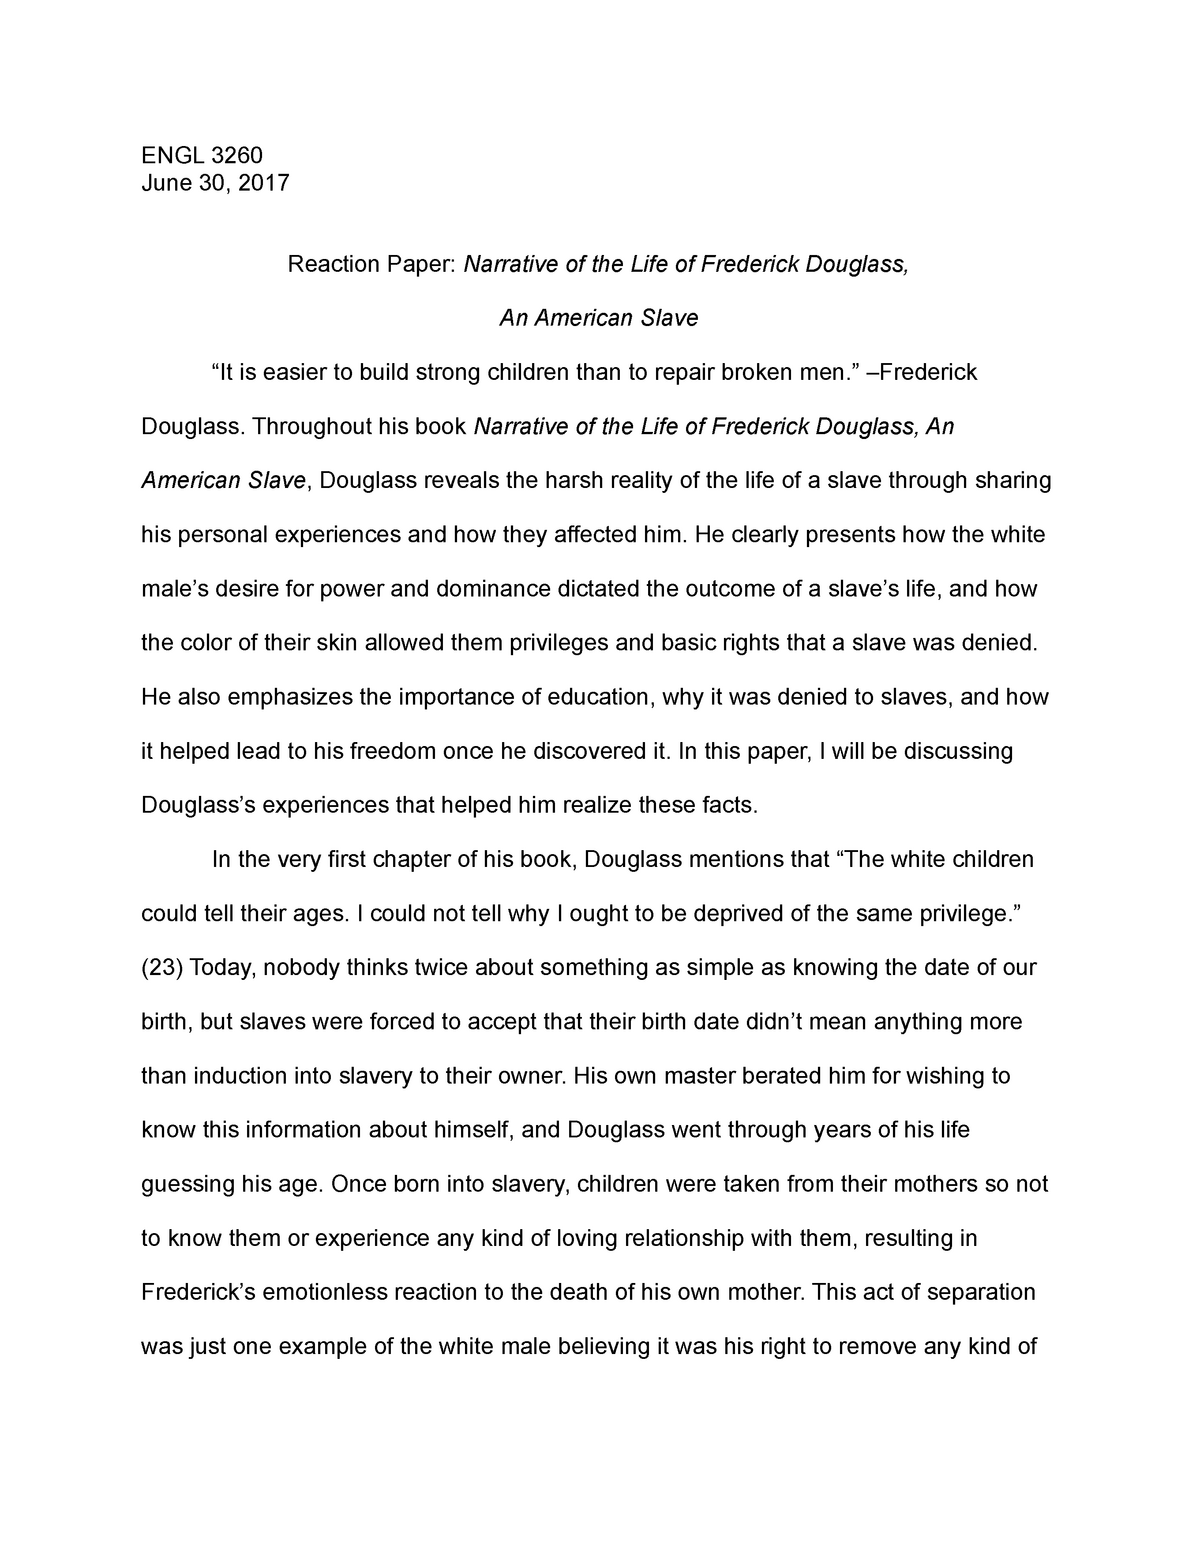 Research paper on reasoning